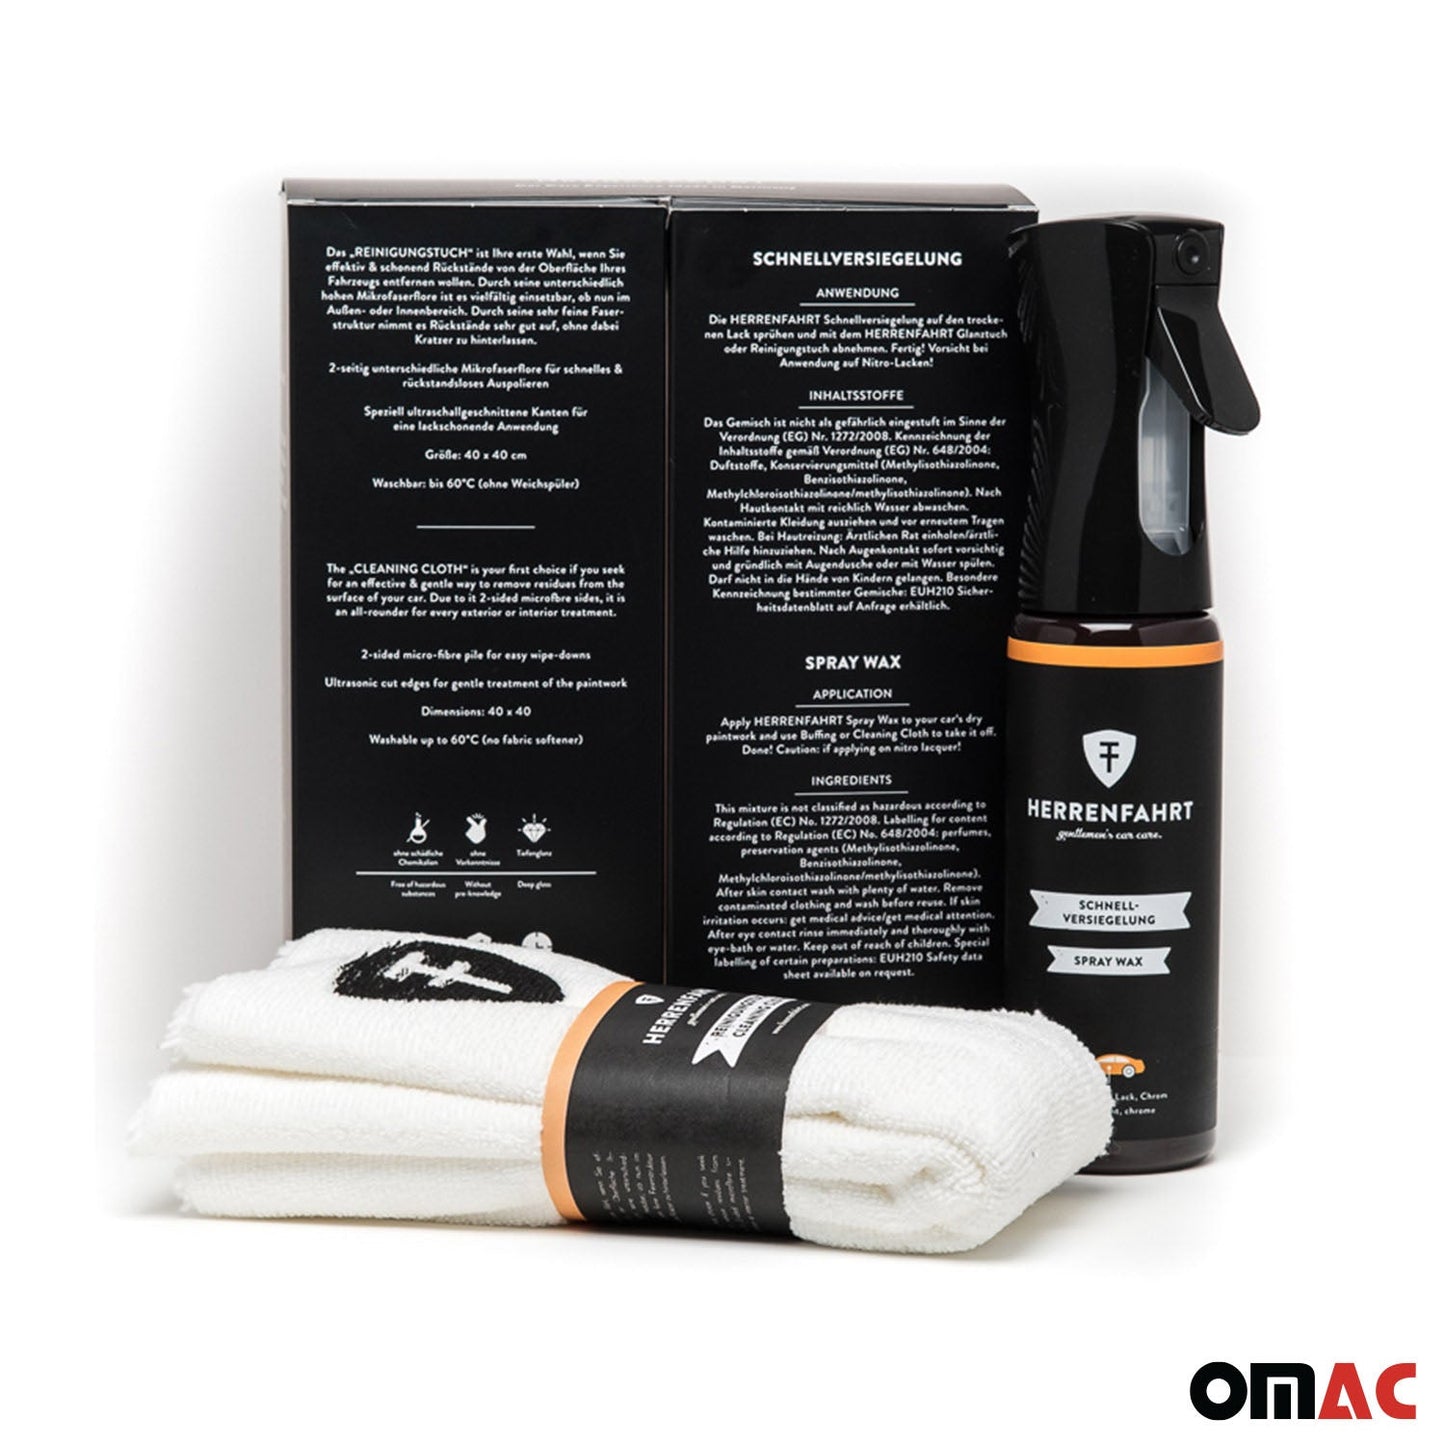 OMAC Quick Detailing & Wax Finish Spray Dry Cleaning Cloth Kit Car Care Set Gift Box HFKIT002